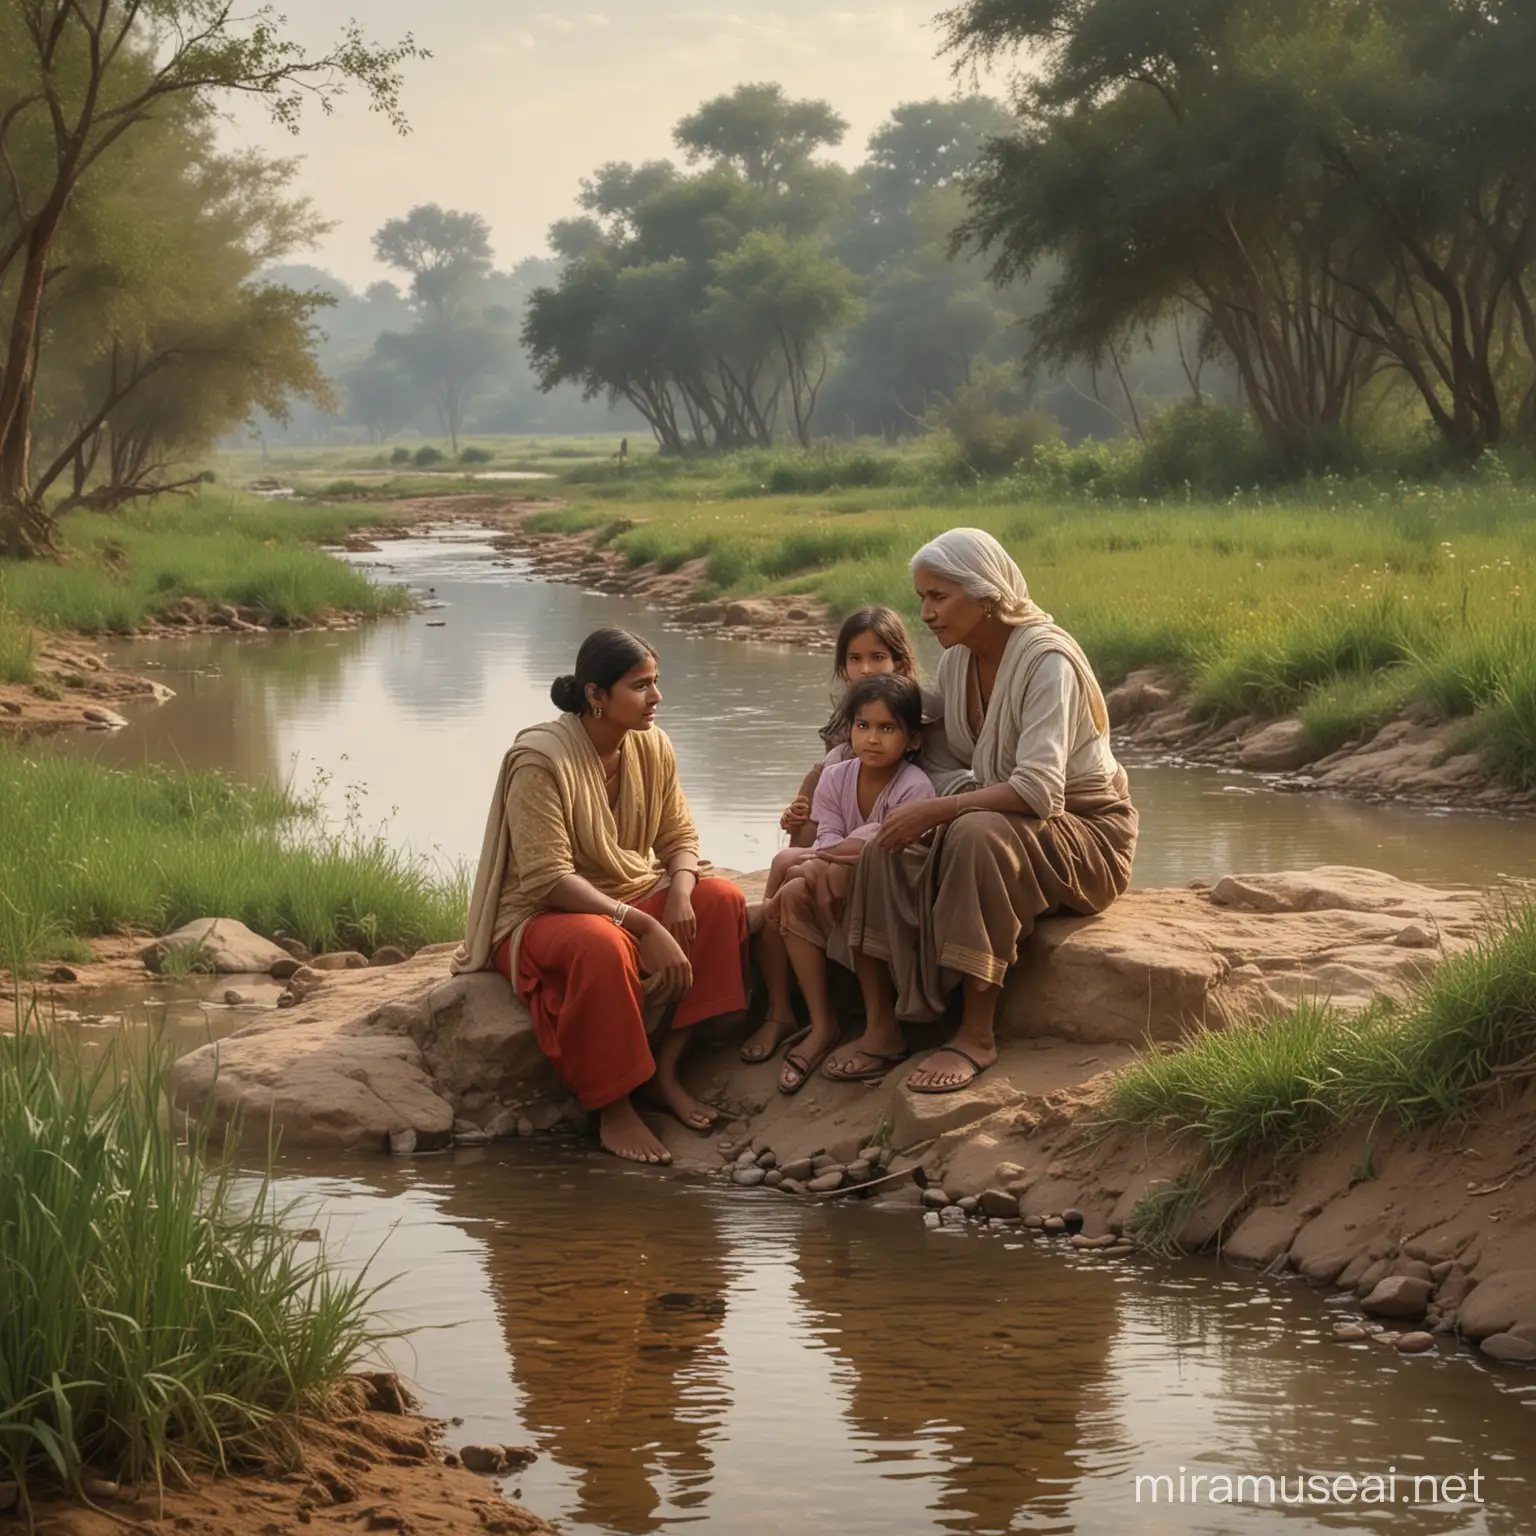 a little girl, a young woman and an old woman sitting near a stream in an Indian landscape